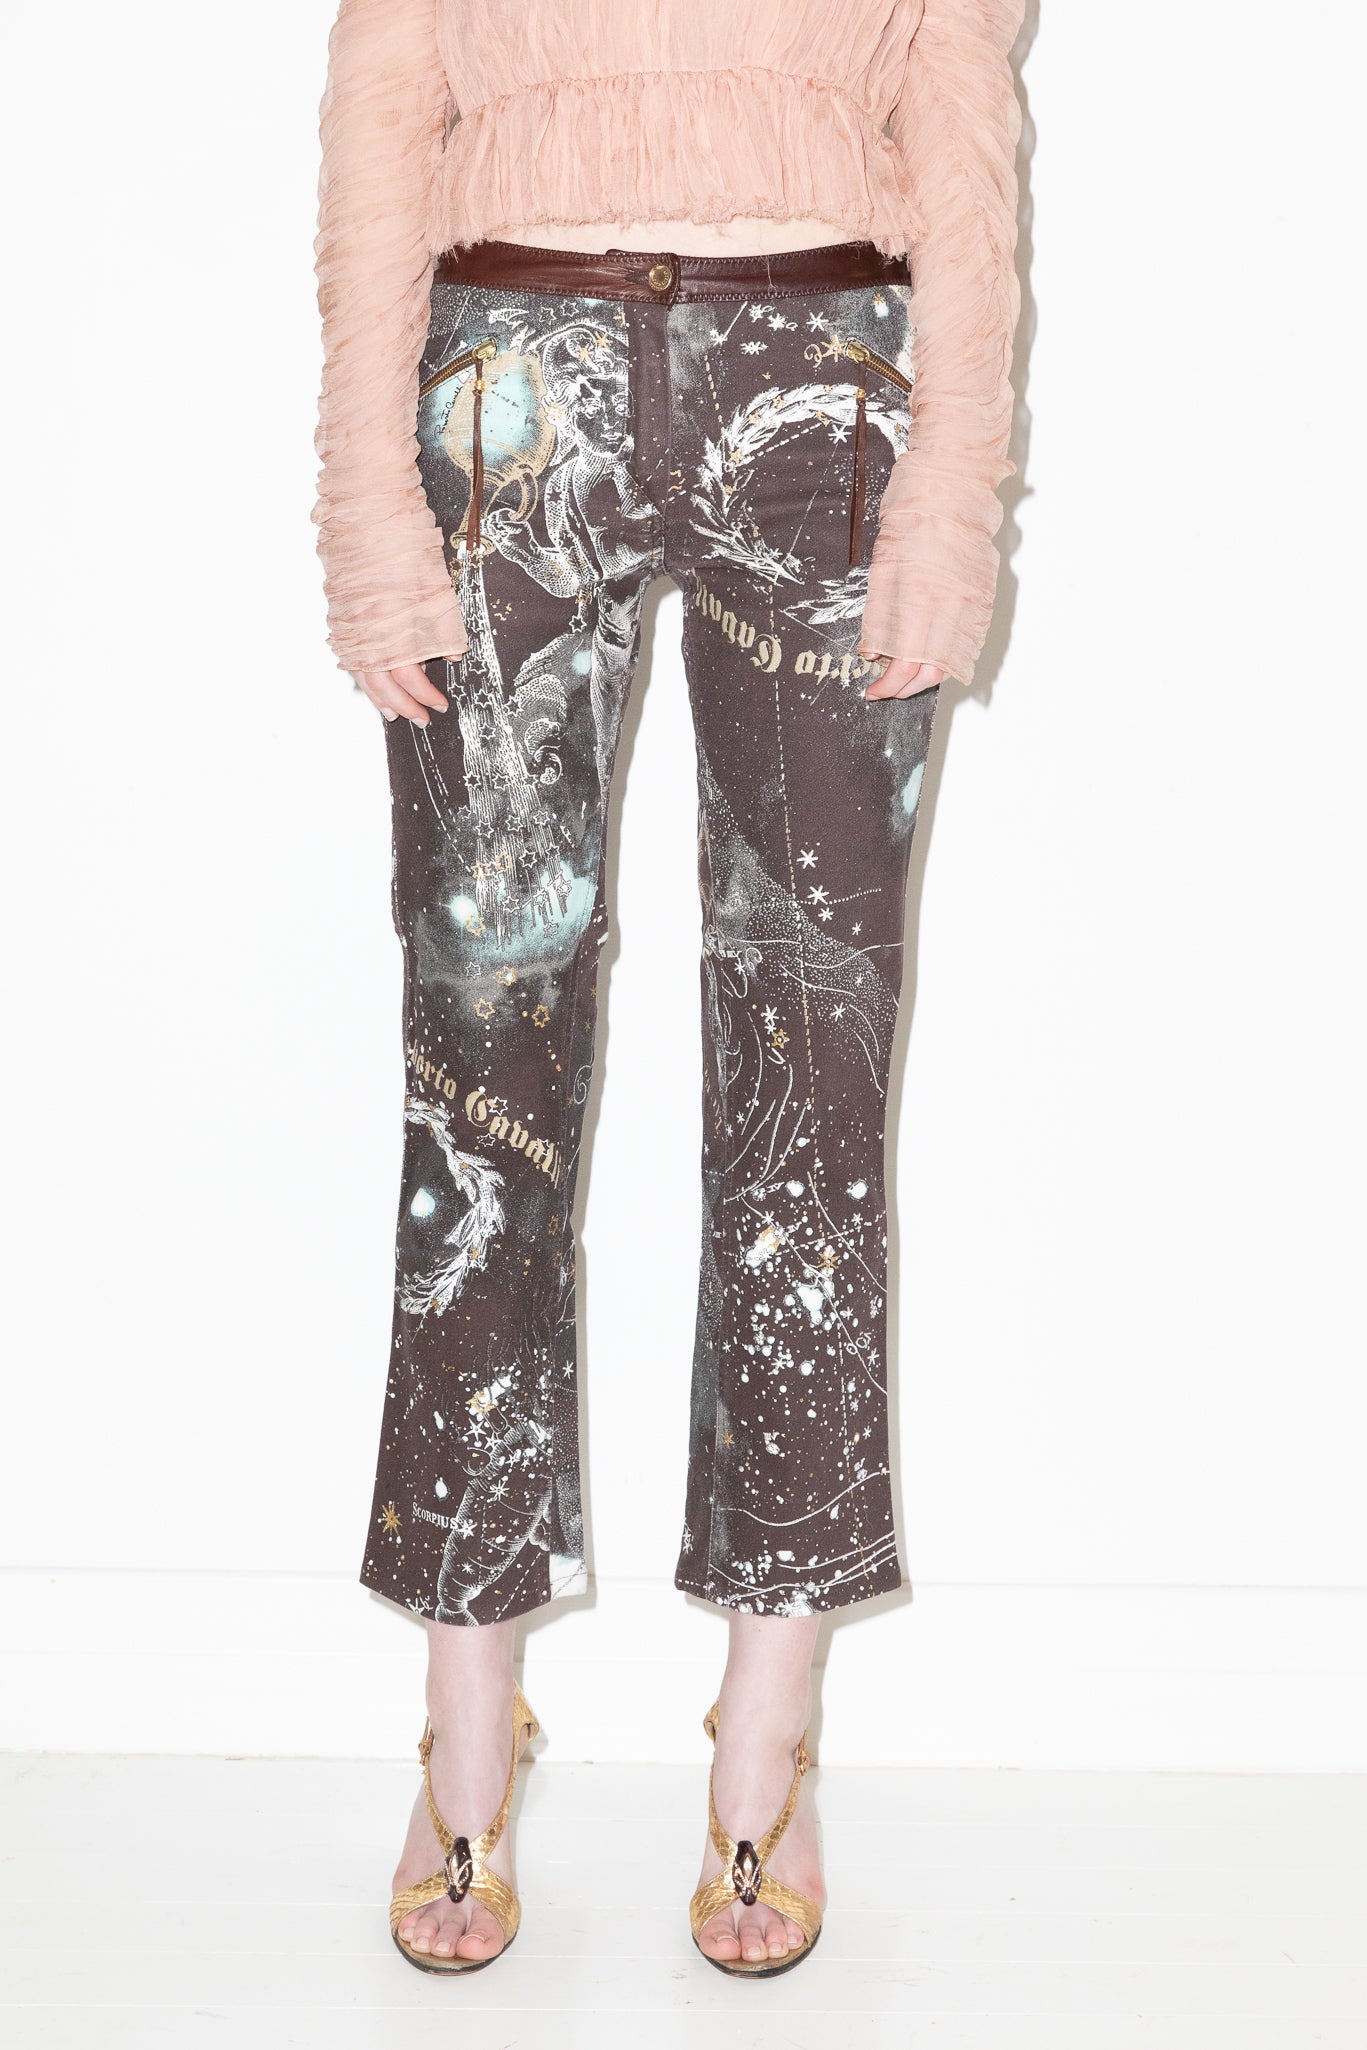 Roberto Cavalli <br> F/W 2003 mainline astrology print jeans with leather trim